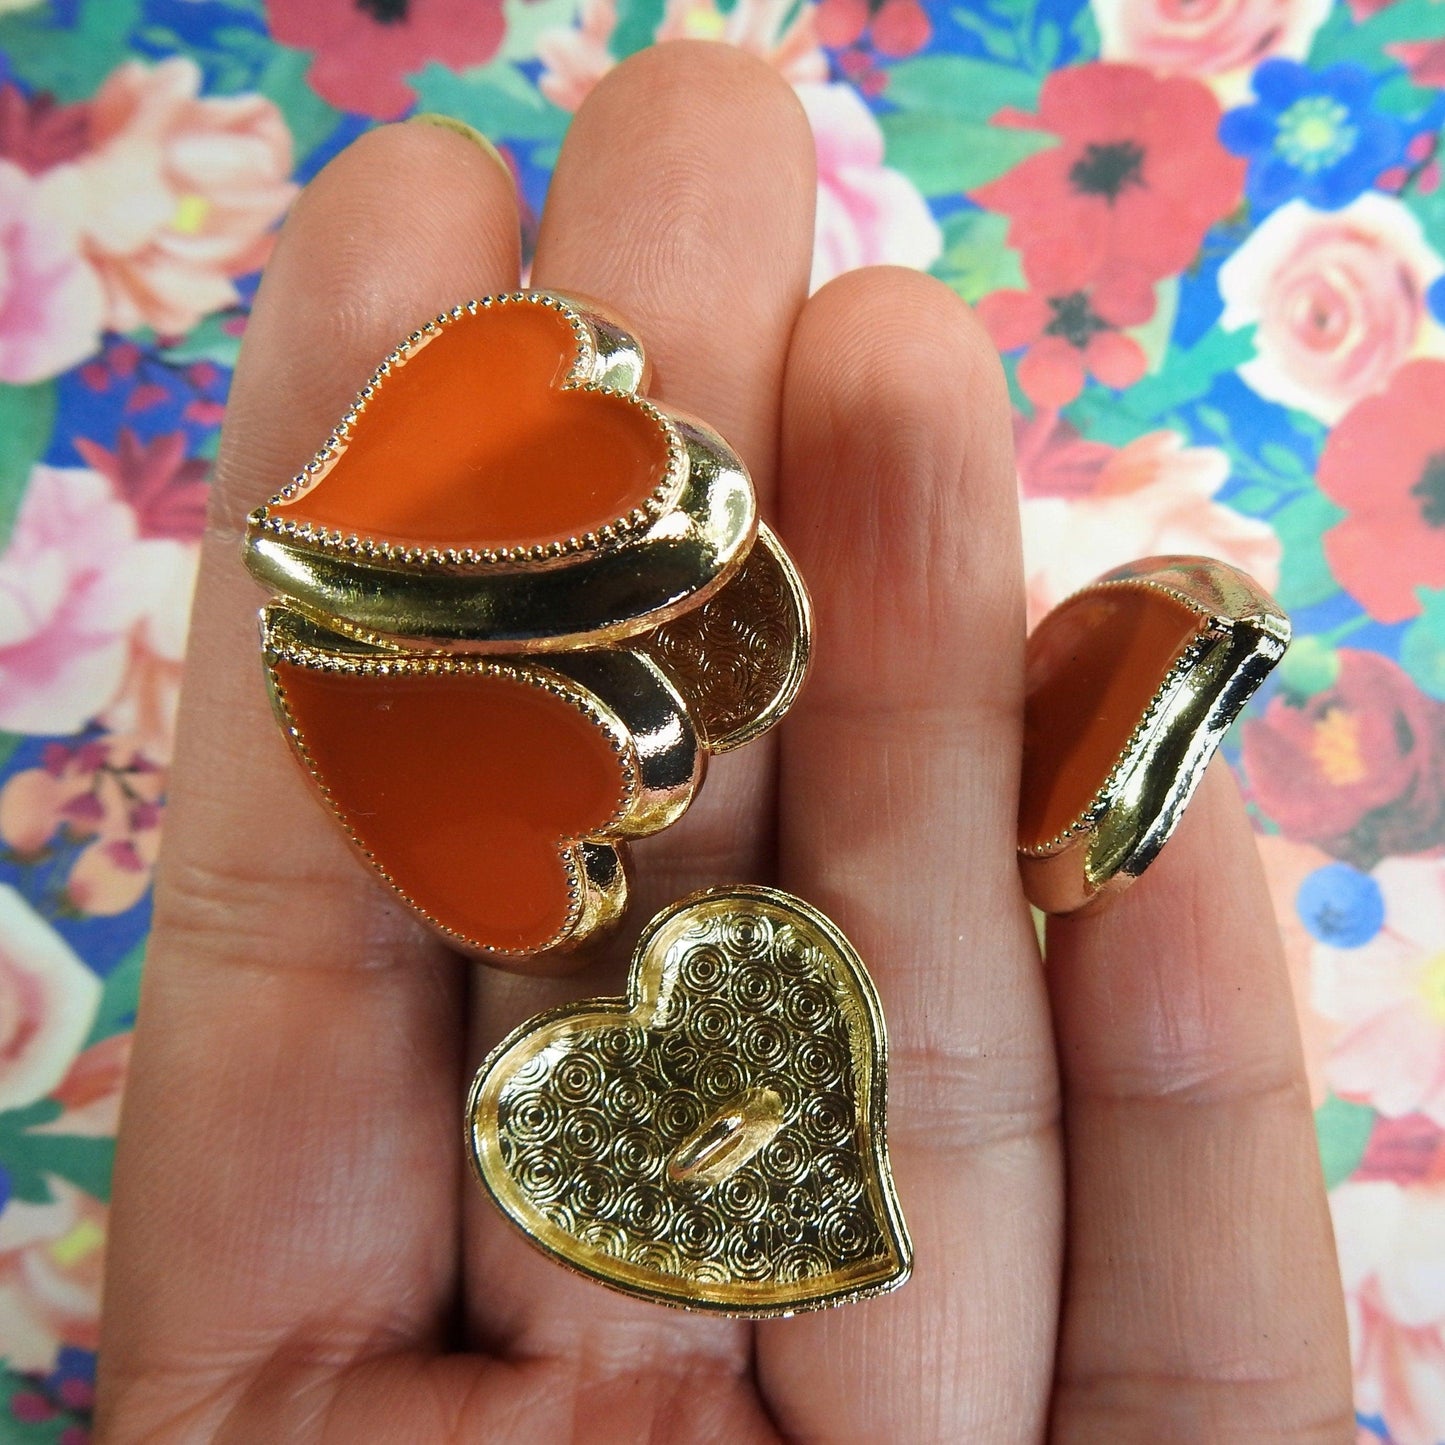 Vintage style metallic buttons heart made from enameled orange painted metal and shank back, assorted lot of 5, for craft, sewing, jewelry